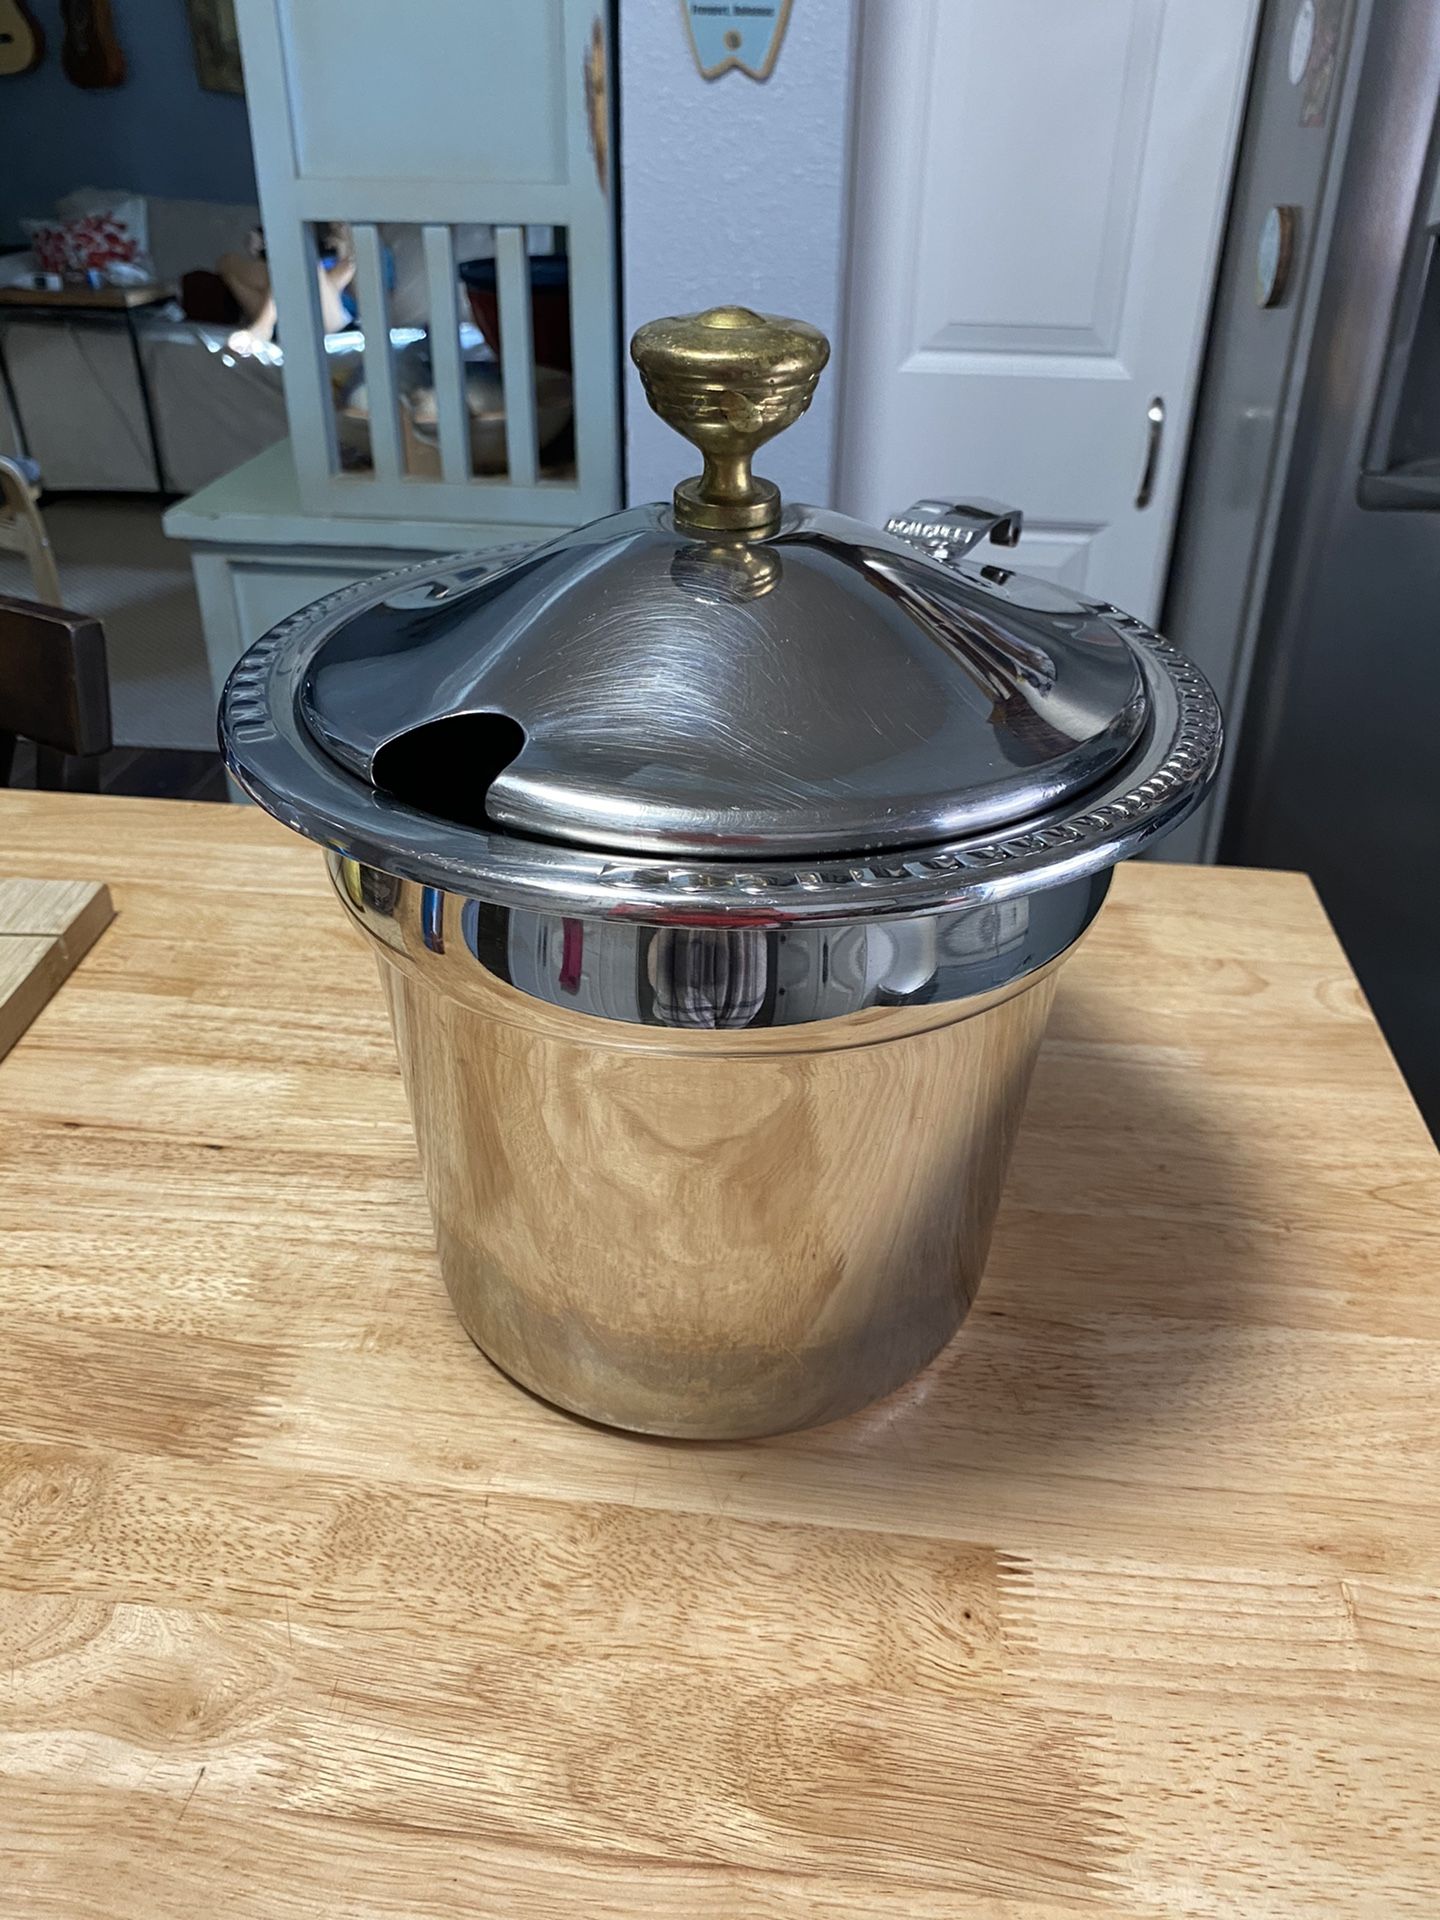 Bon Chef soup Tureen with lid